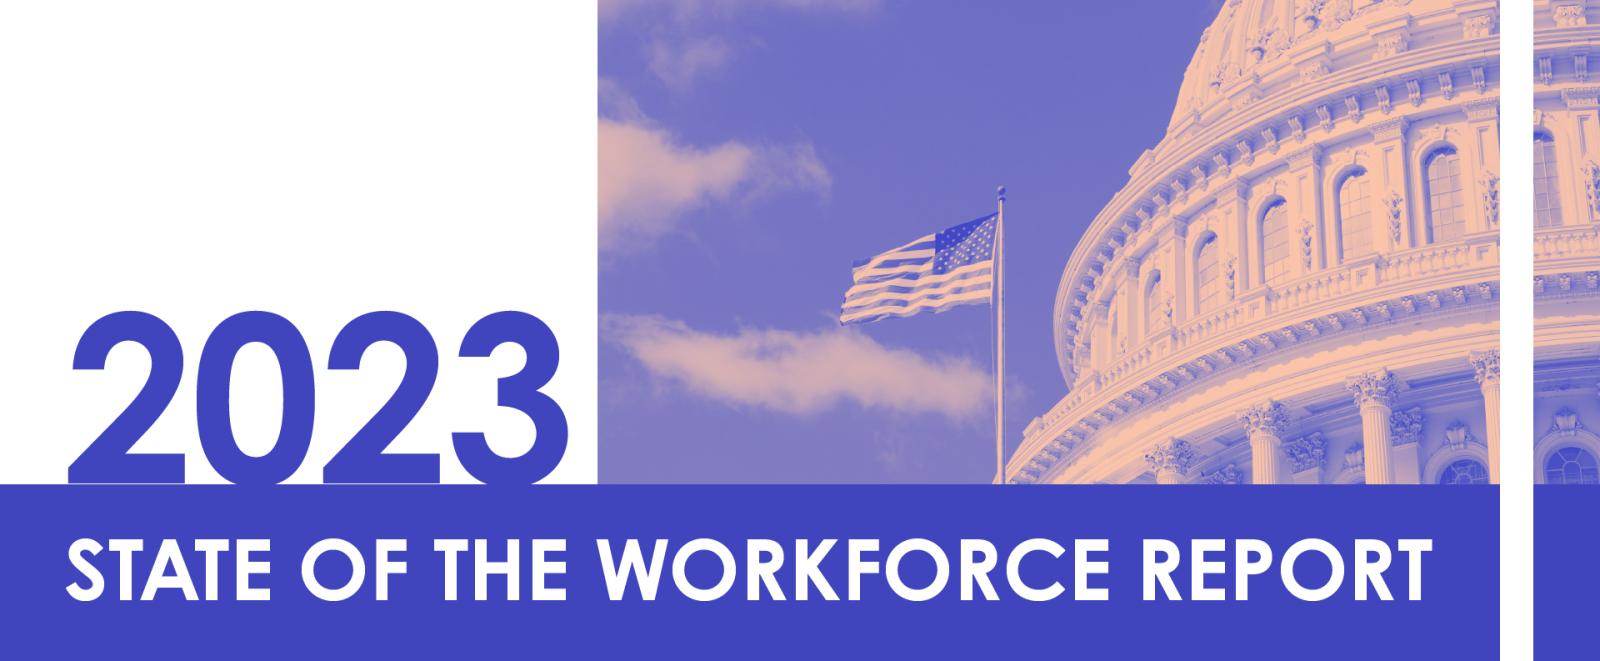 2023 State of the Workforce Report